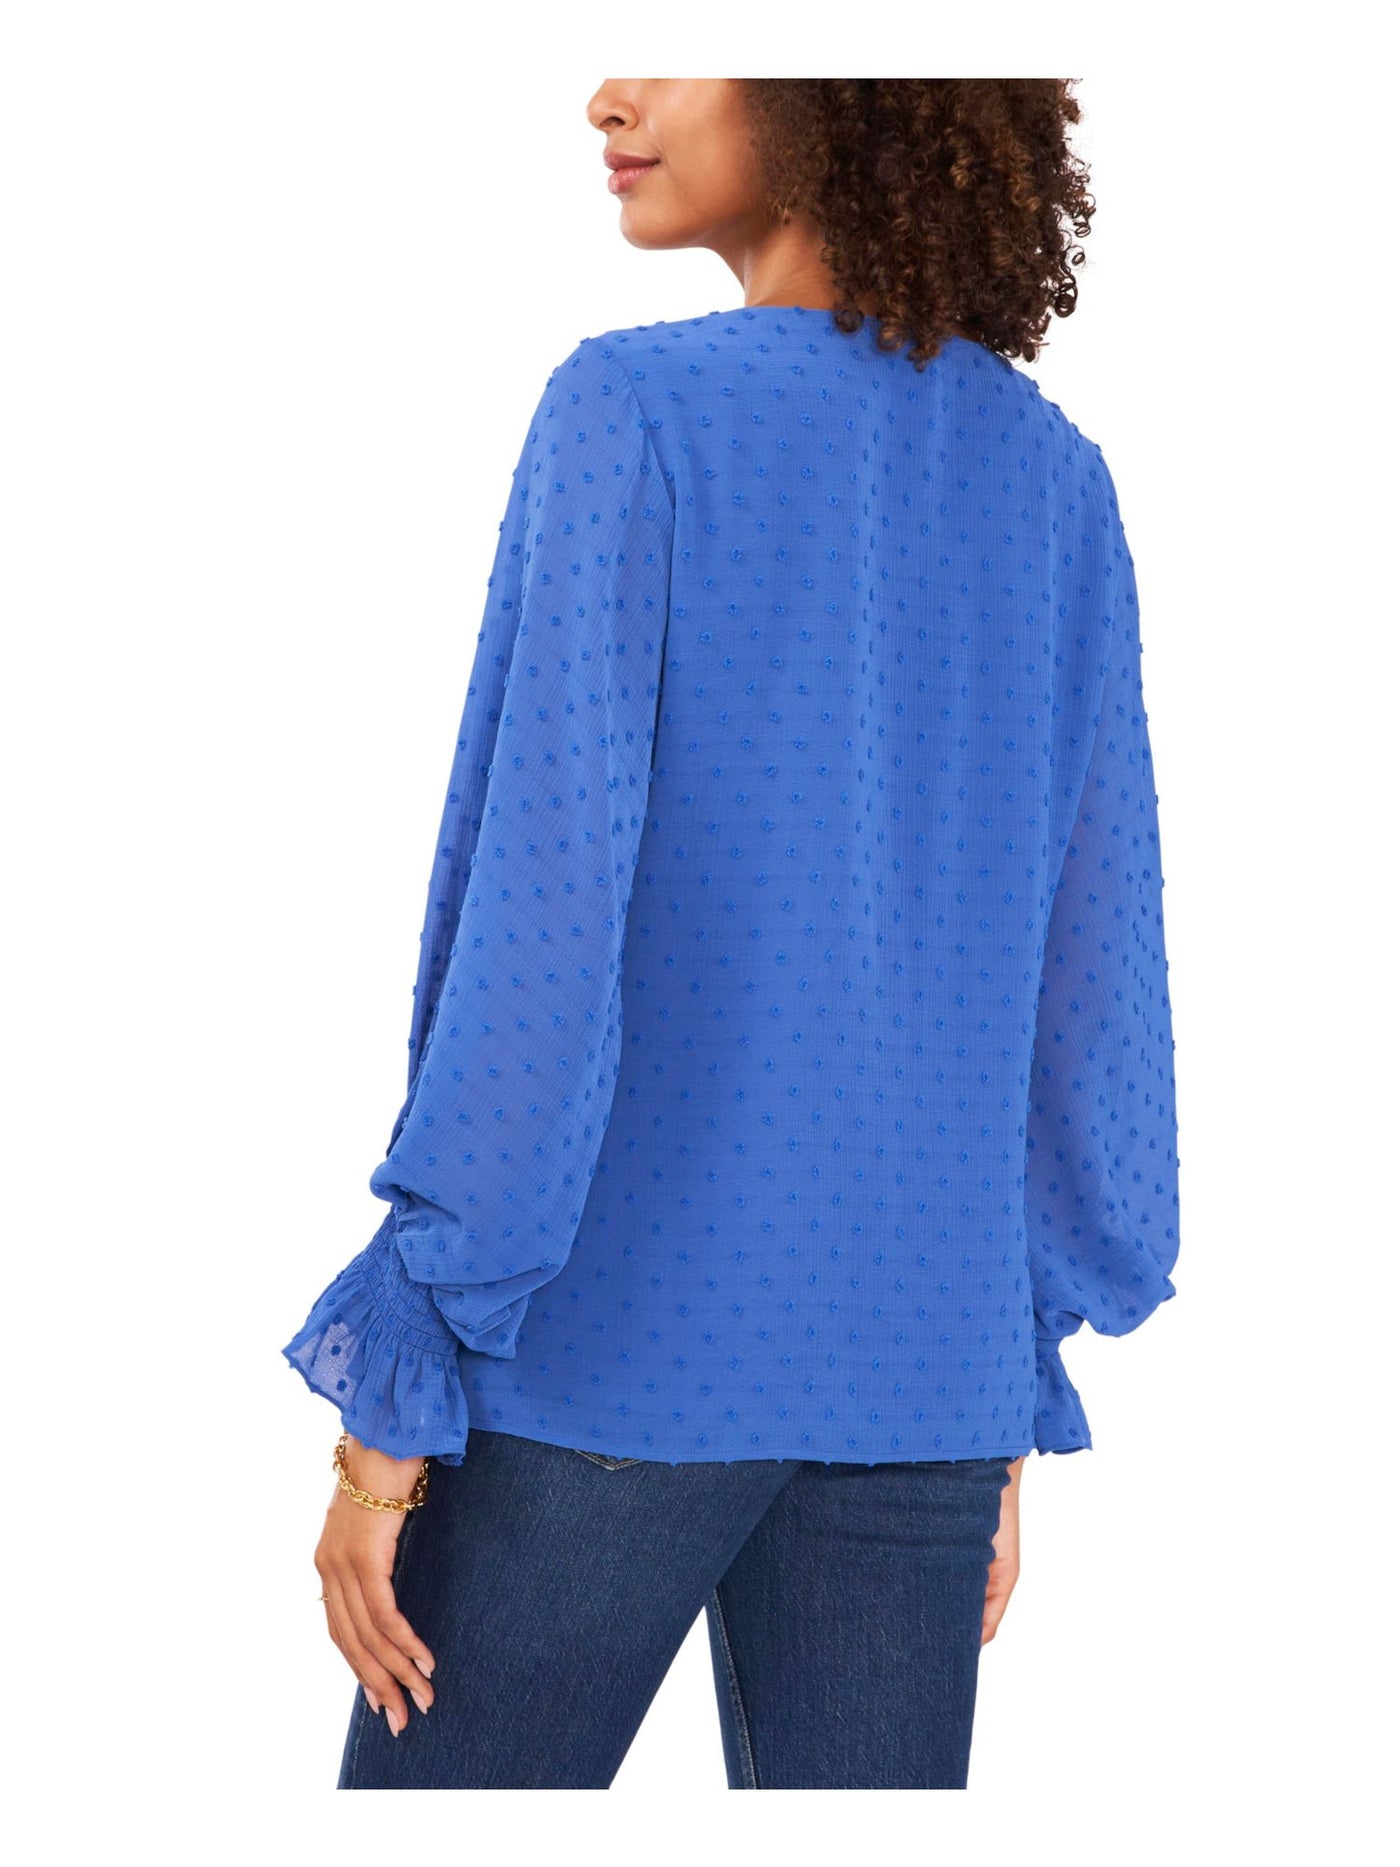 VINCE CAMUTO Womens Blue Smocked Lined Sheer Darted Long Sleeve V Neck Blouse S